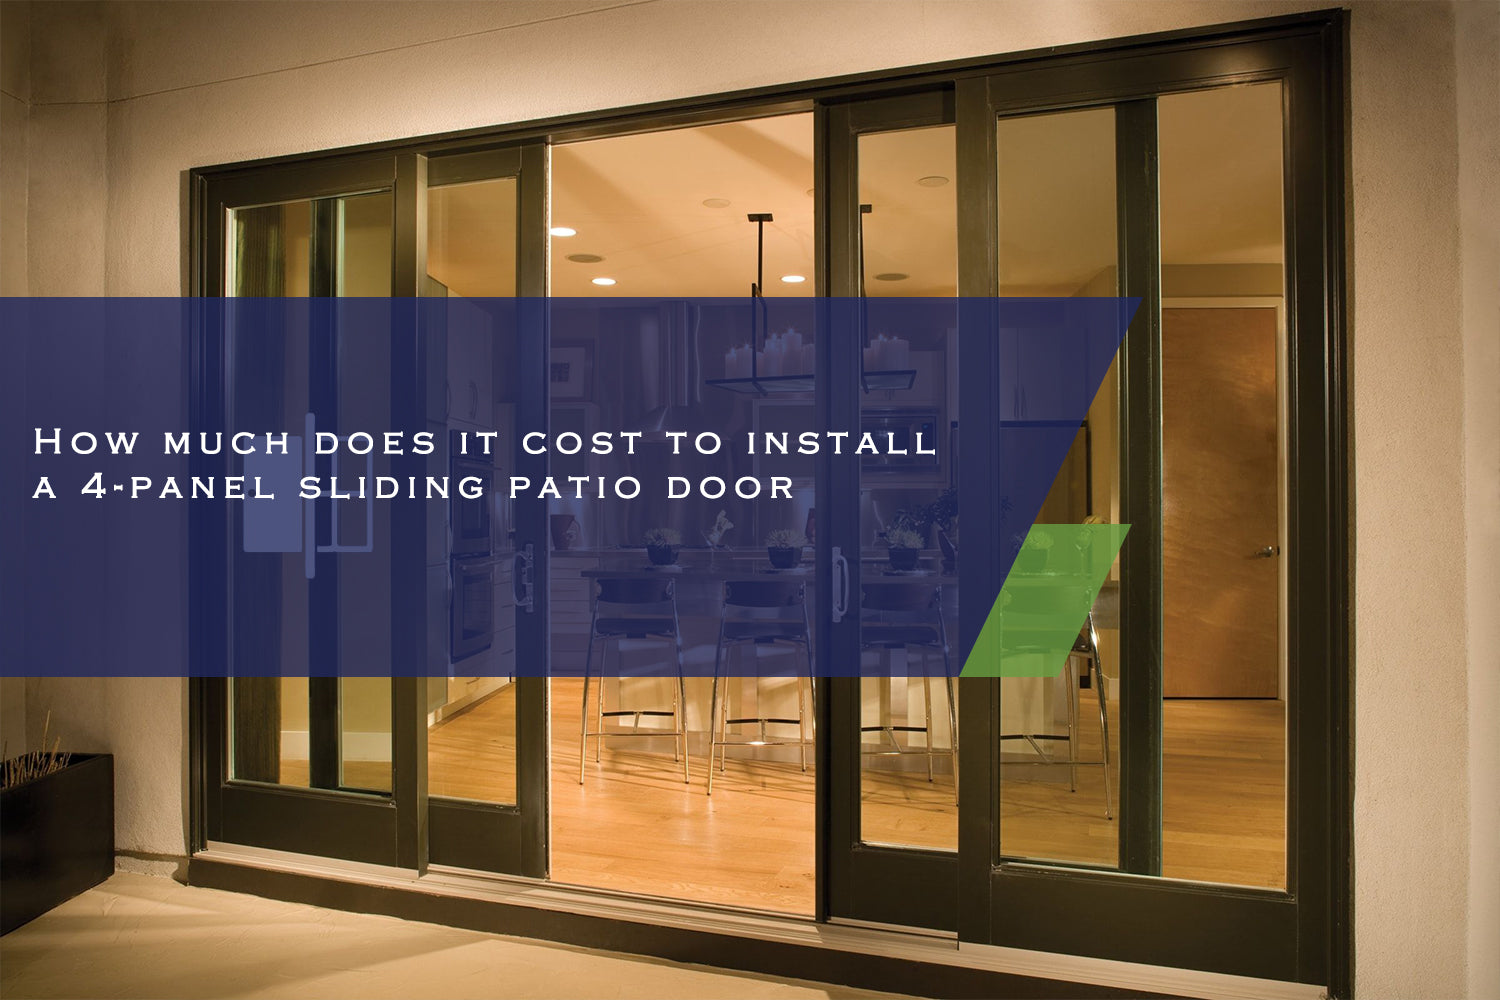 How Much Does It Cost to Install a 4-Panel Sliding Patio Door